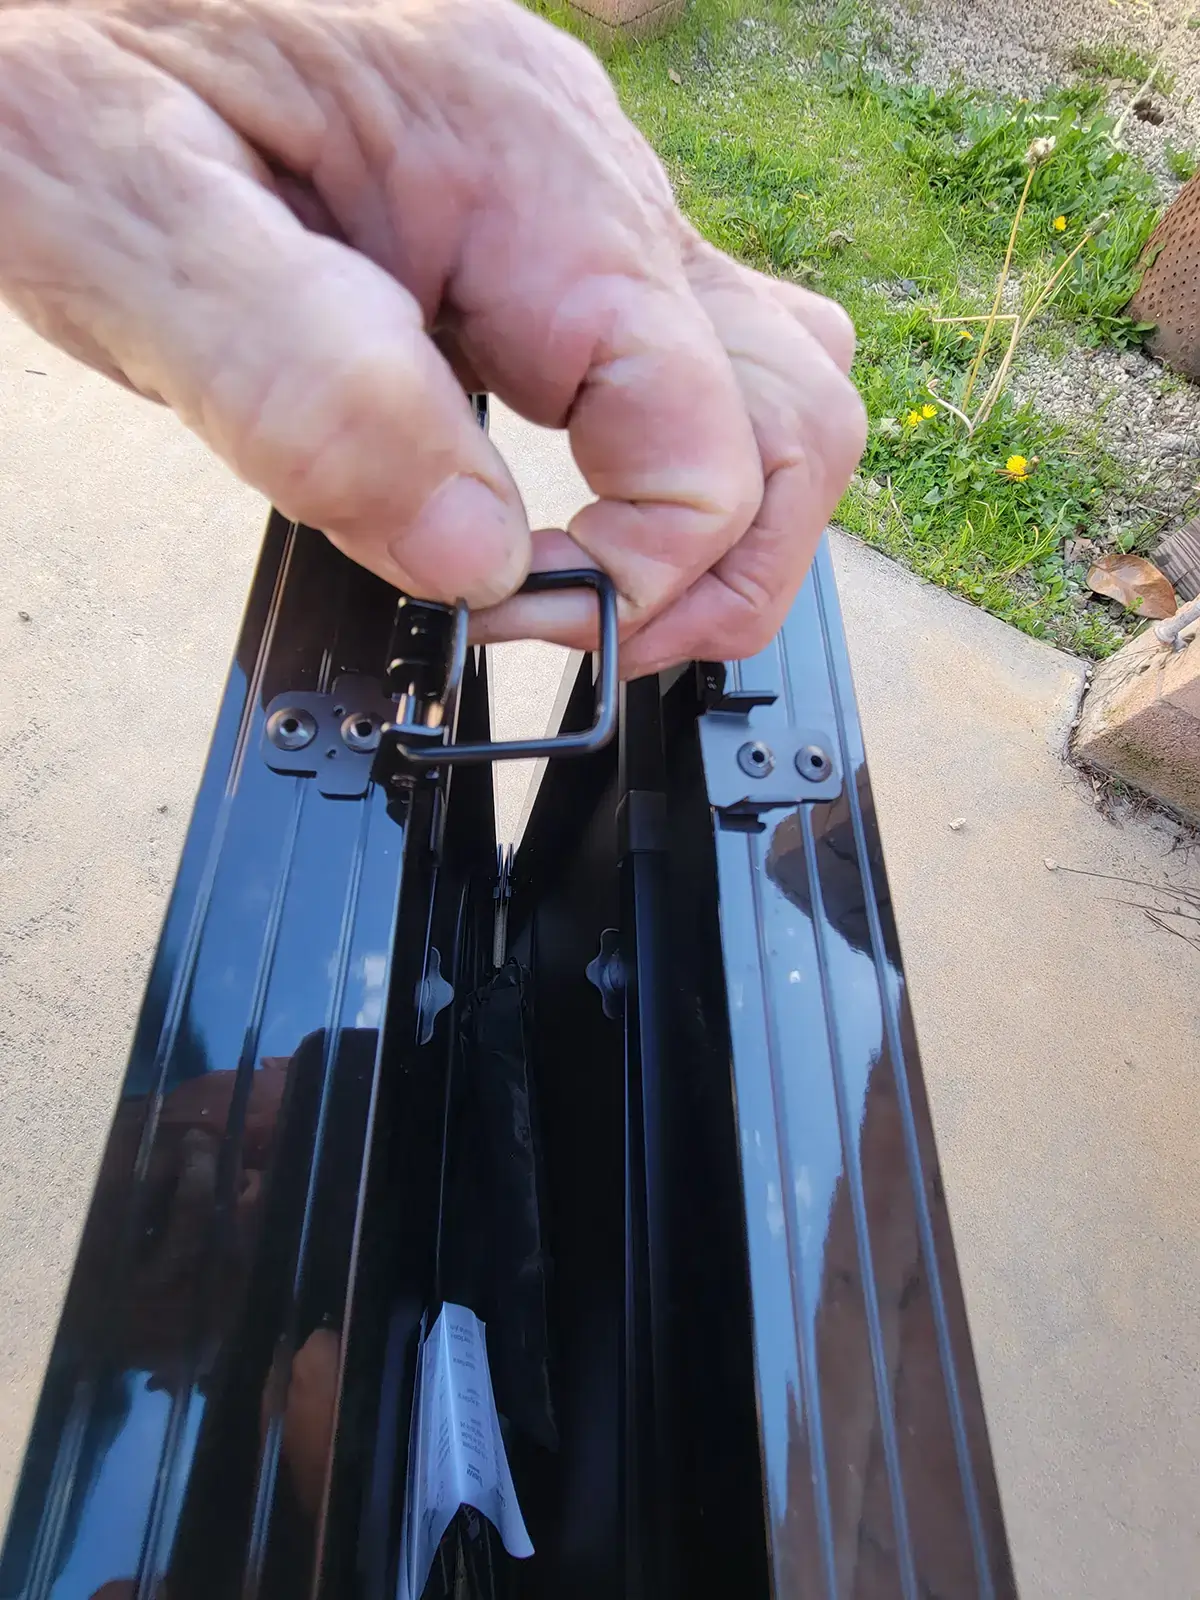 a hand releases one of the latches on the Renogy 100-watt foldable suitcase solar panel kit